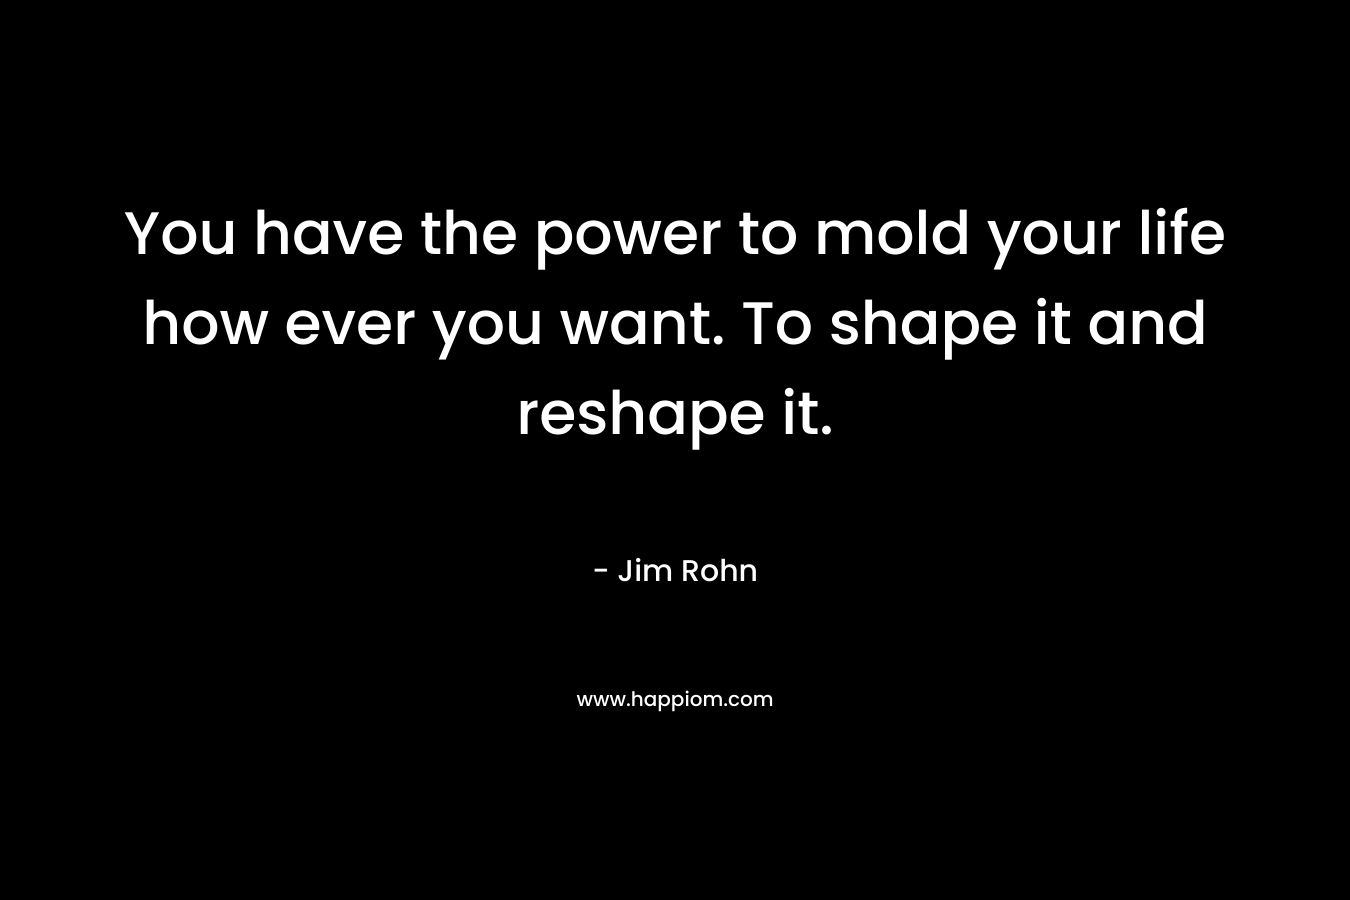 You have the power to mold your life how ever you want. To shape it and reshape it. – Jim Rohn